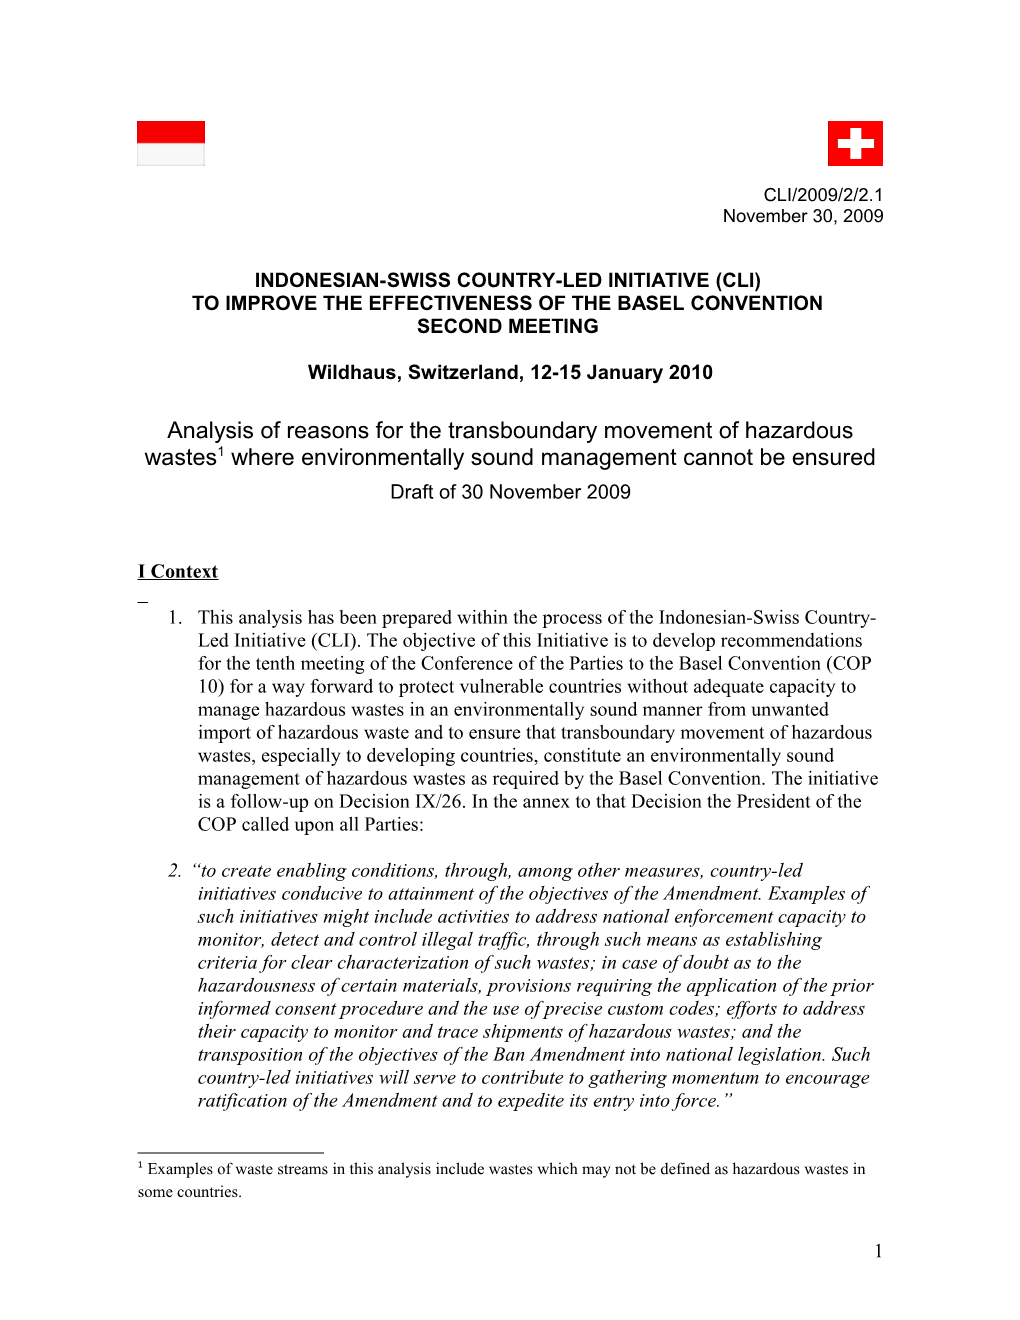 Indonesian-Swiss COUNTRY-LED INITIATIVE (CLI)